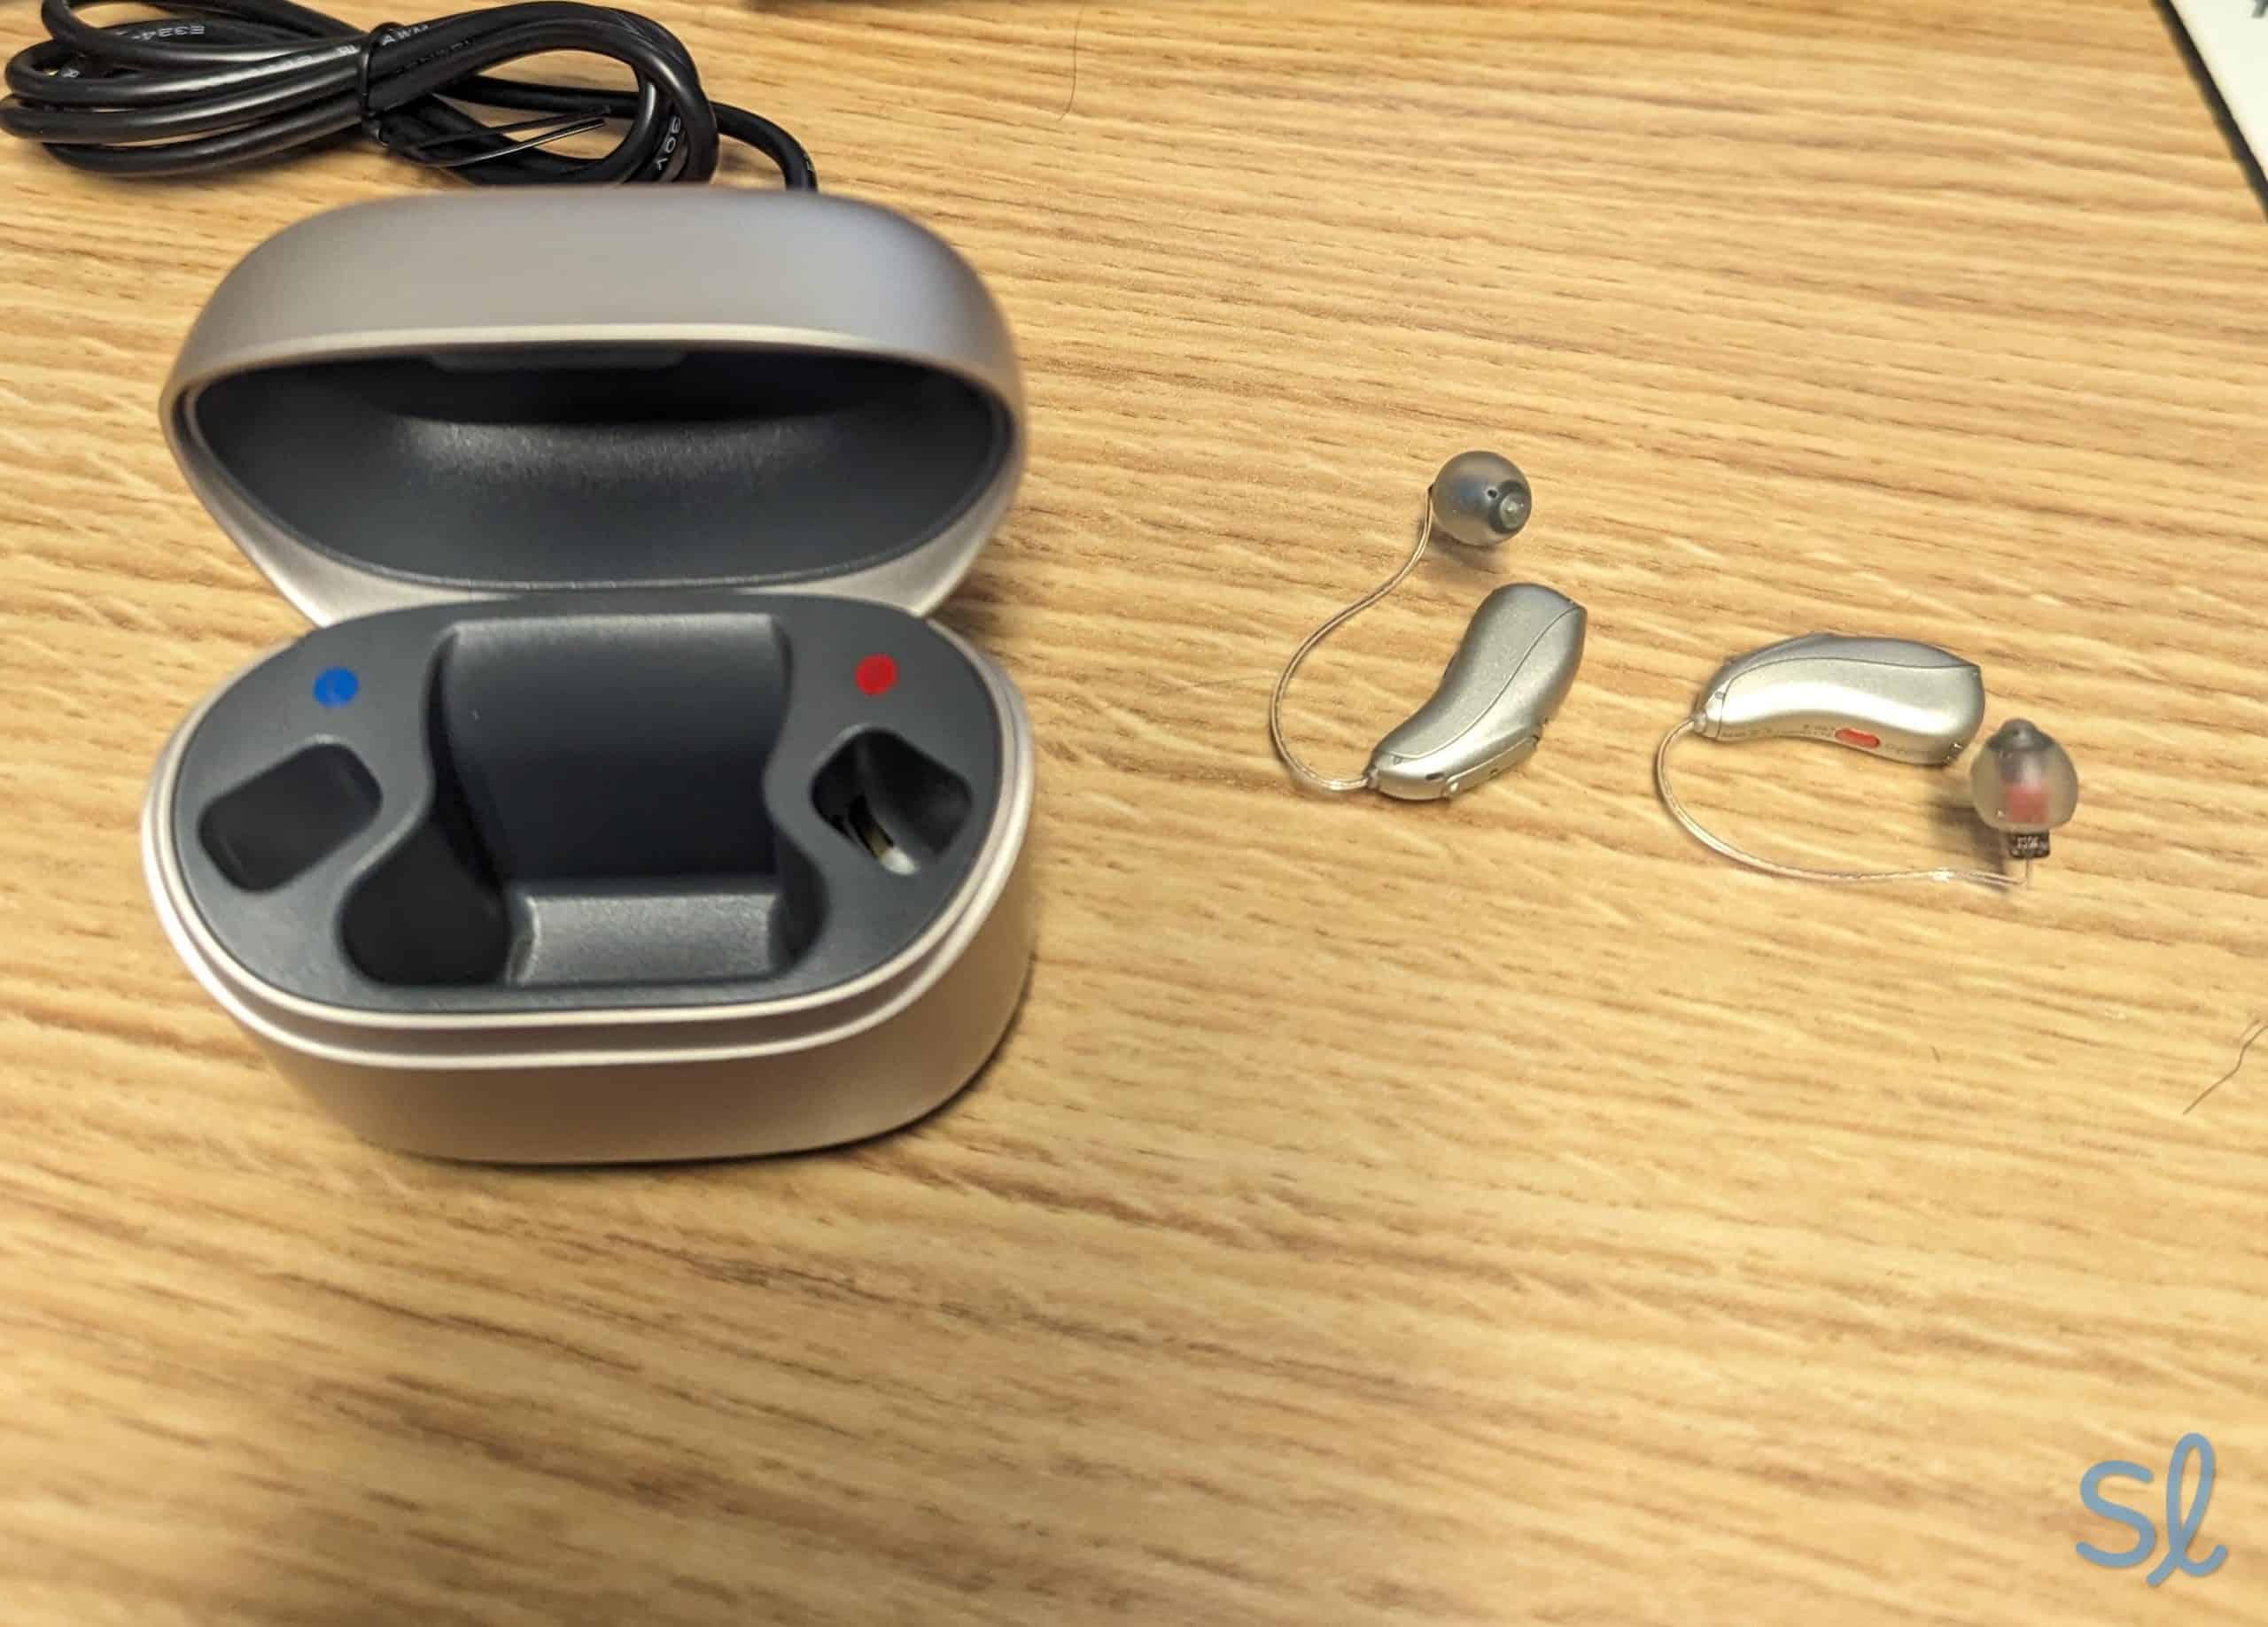 Testing out Phonak hearing aids